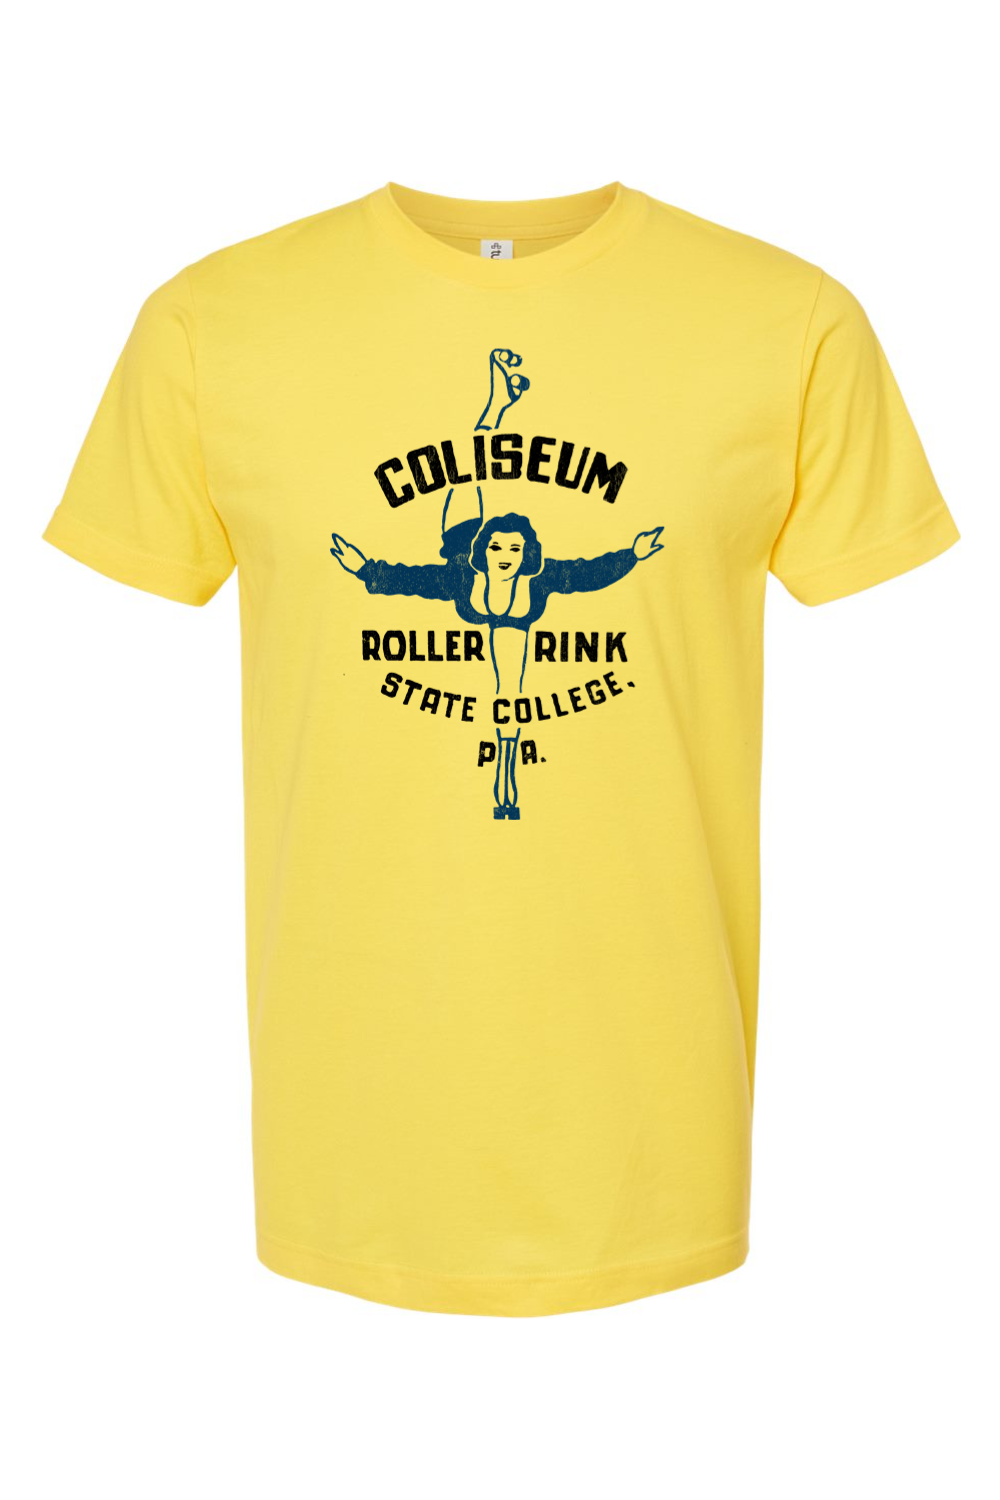 Coliseum Roller Rink - State College, PA